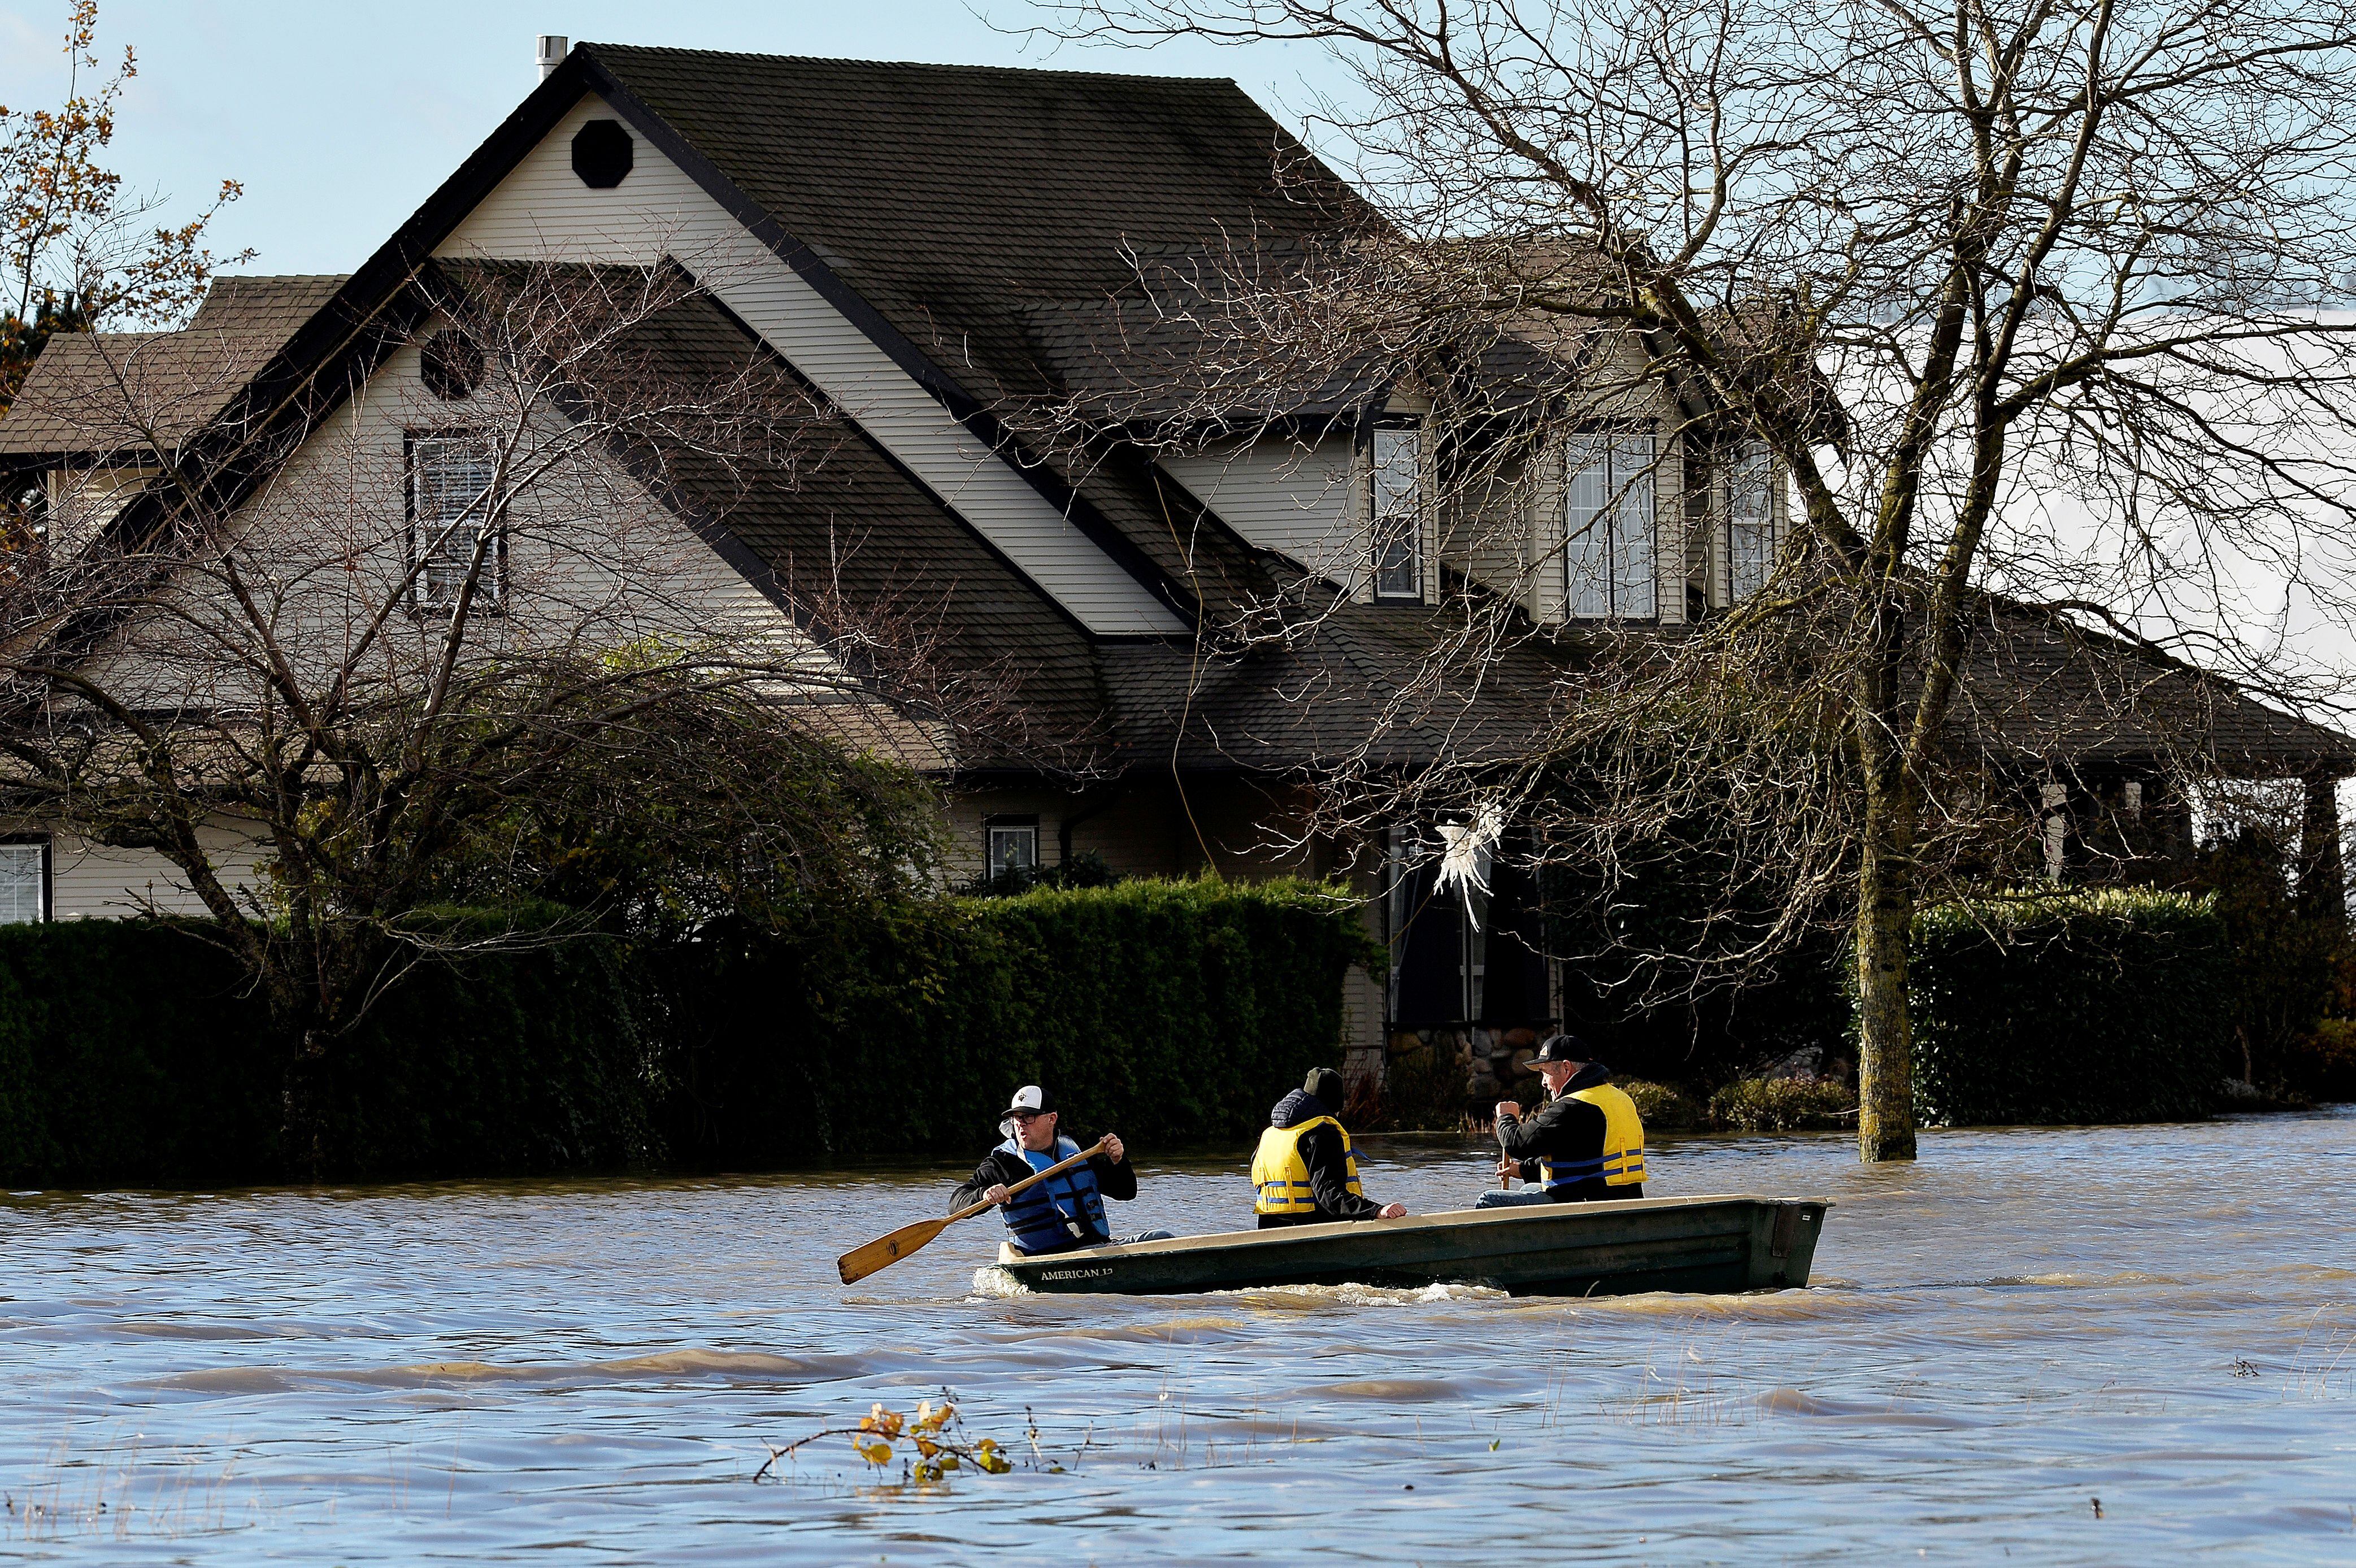 Where there was a street, three men travel in a boat to travel to Abbotsford (REUTERS / Jennifer Gauthier)